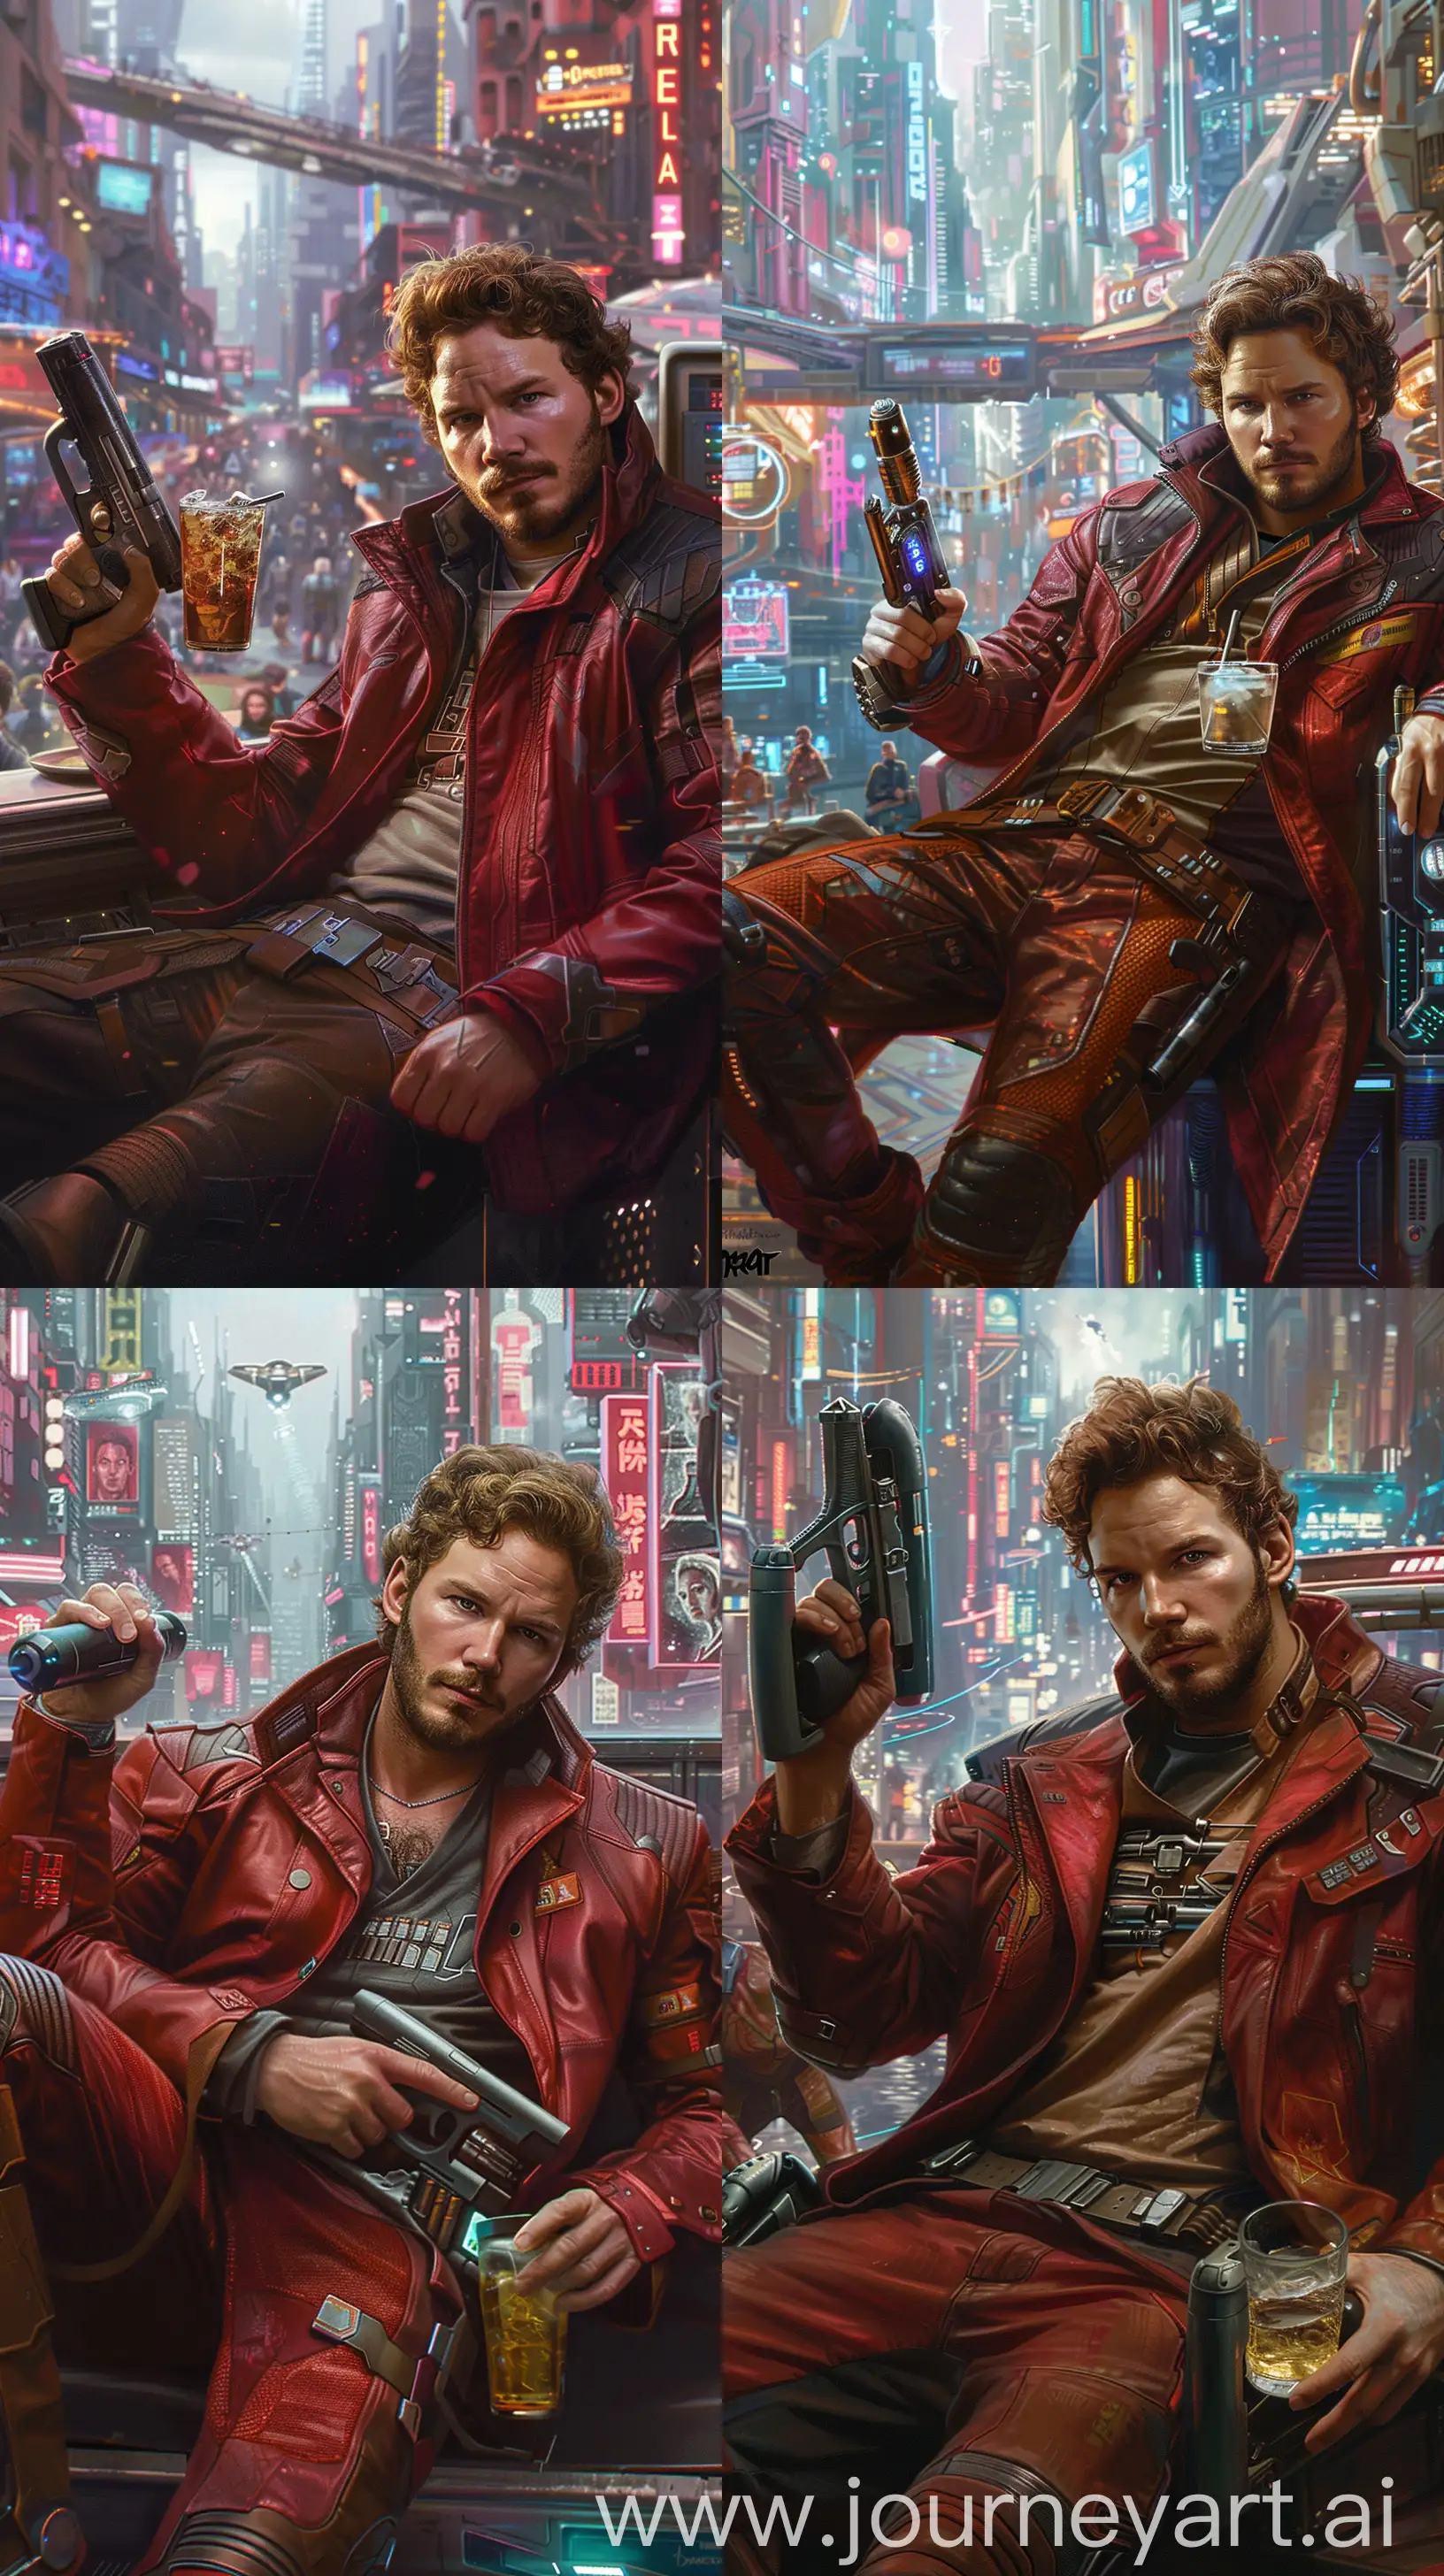 In the image, Star-Lord and his team, a man with brown hair and a beard, is holding a blaster while sitting on a booth in a cyberpunk city. He wears a red jacket and holds a drink in his hand. The background features a cityscape with neon lights --ar 9:16 --s 250